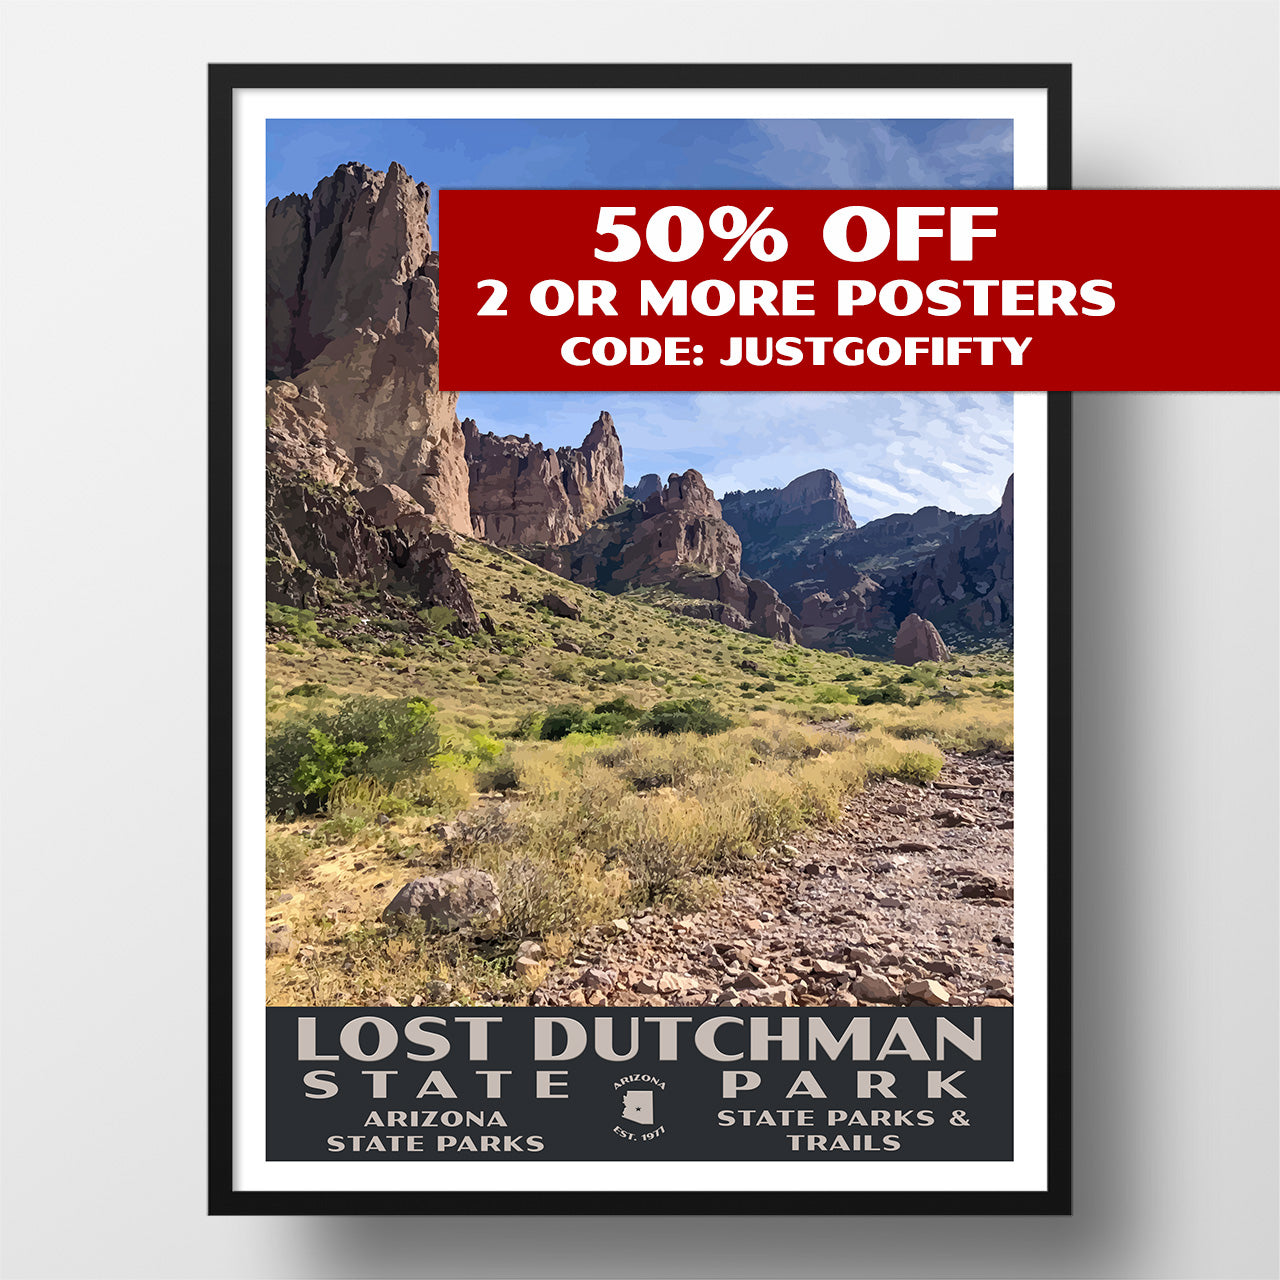 Lost Dutchman State Park poster